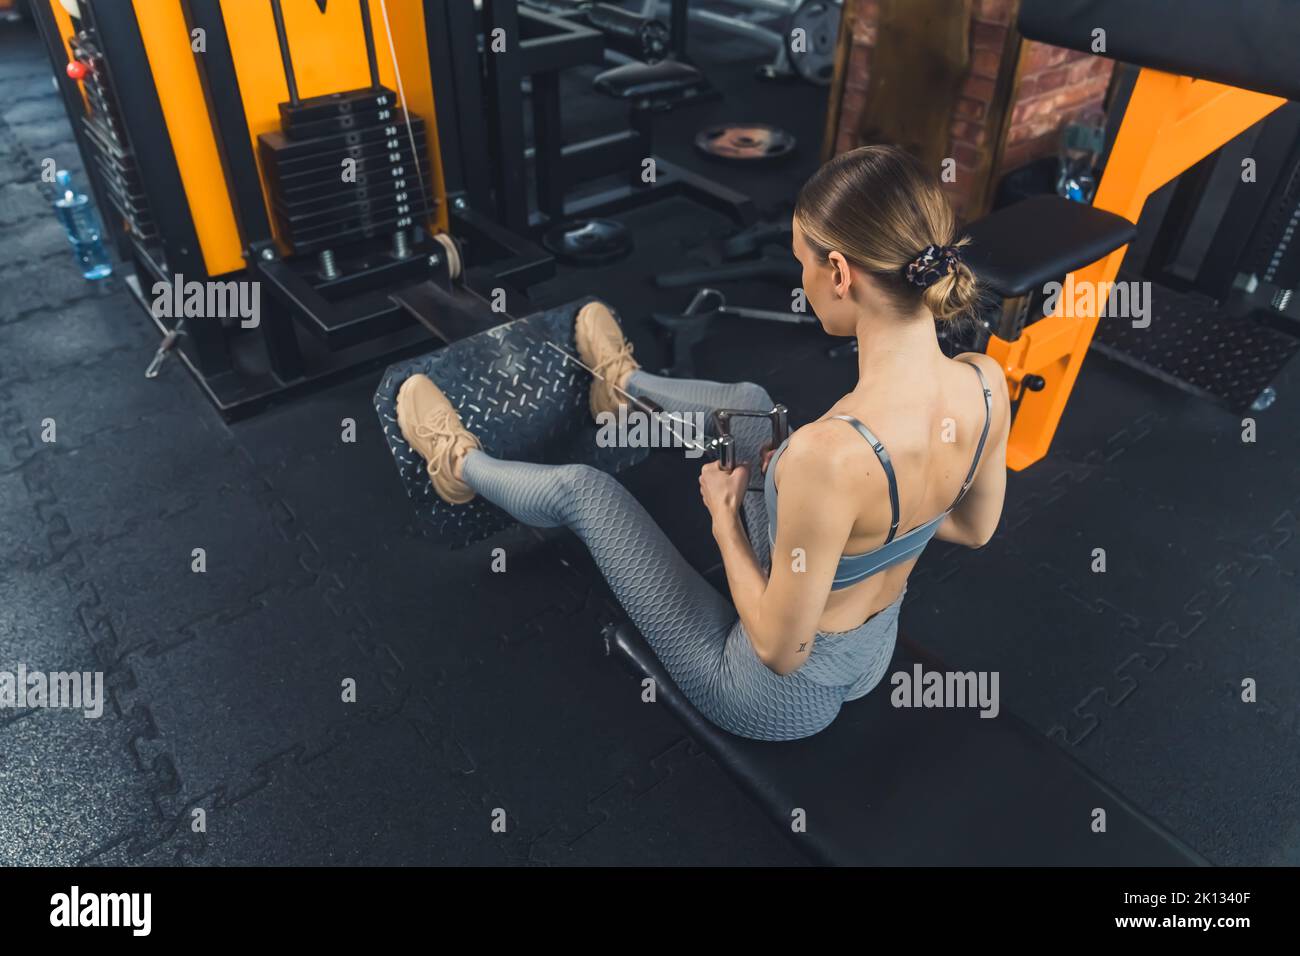 young girl working out hard at the gym, full shot sporty lifestyle. High quality photo Stock Photo